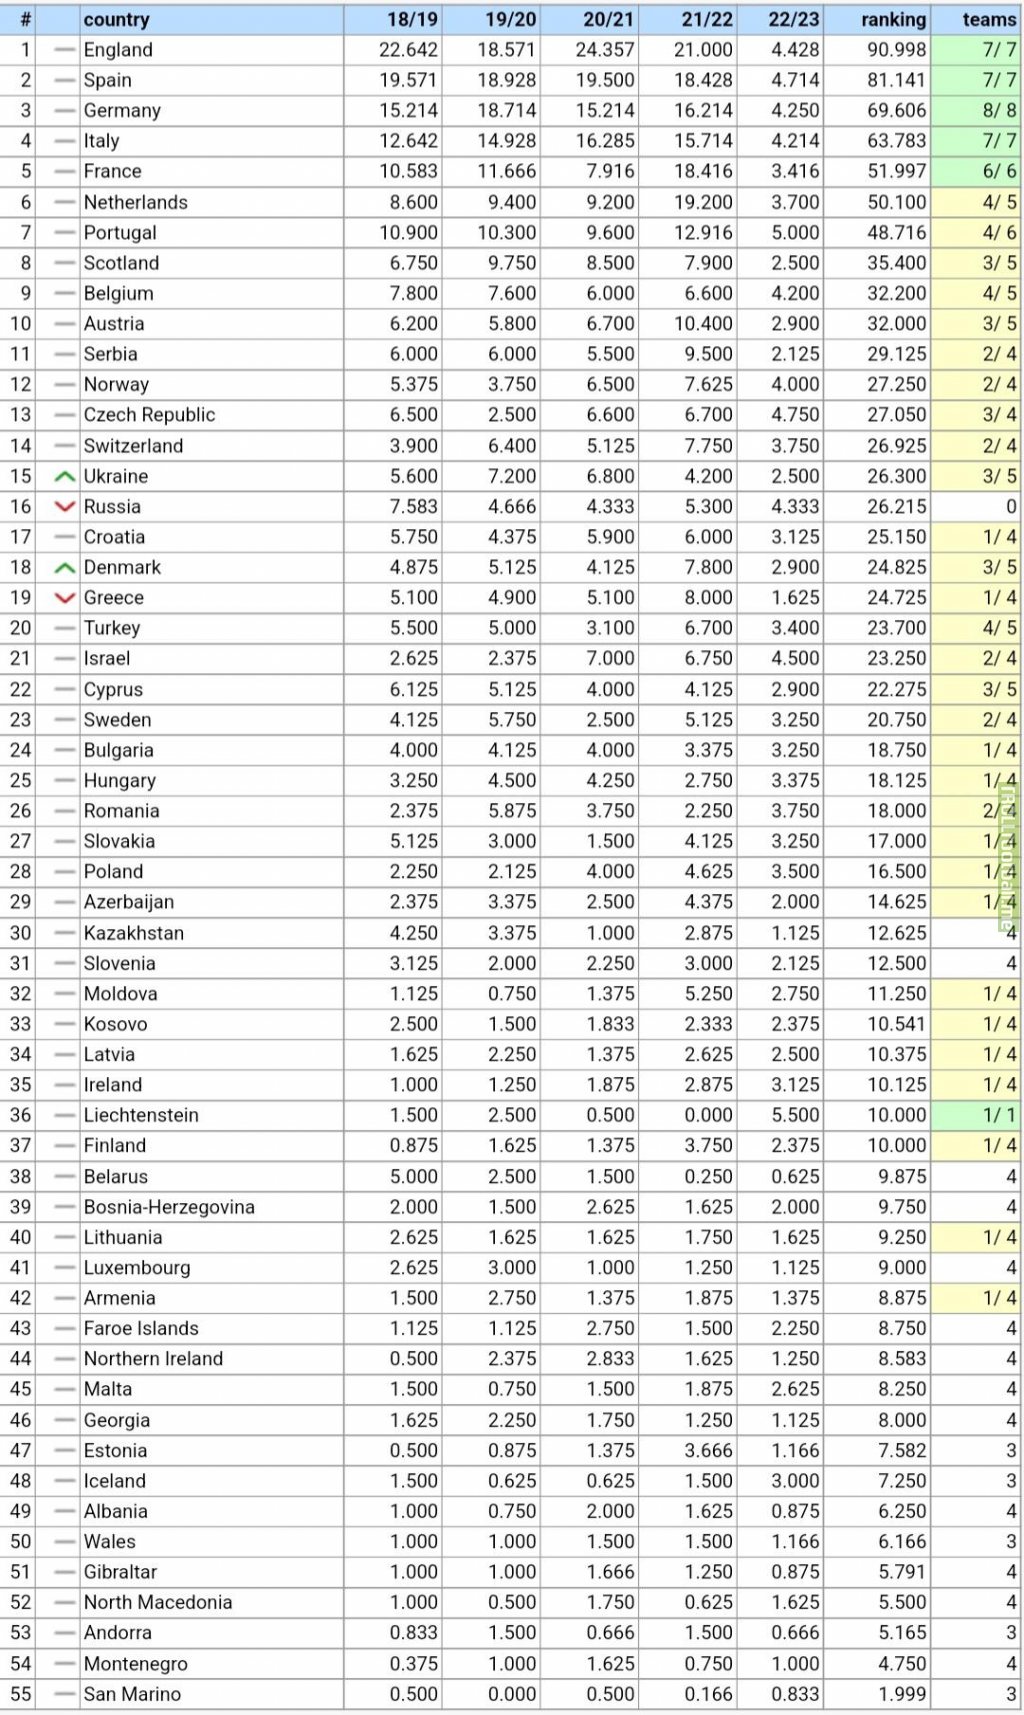 UEFA Country Coefficient after today's games